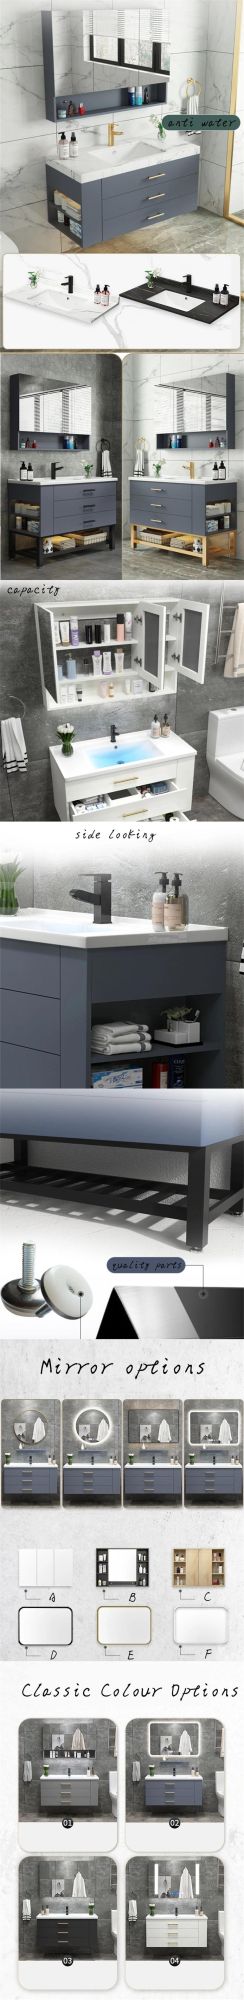 Modern Glass Basin Bathroom Vanity Cabinet with LED Mirror with Real Cheap Price